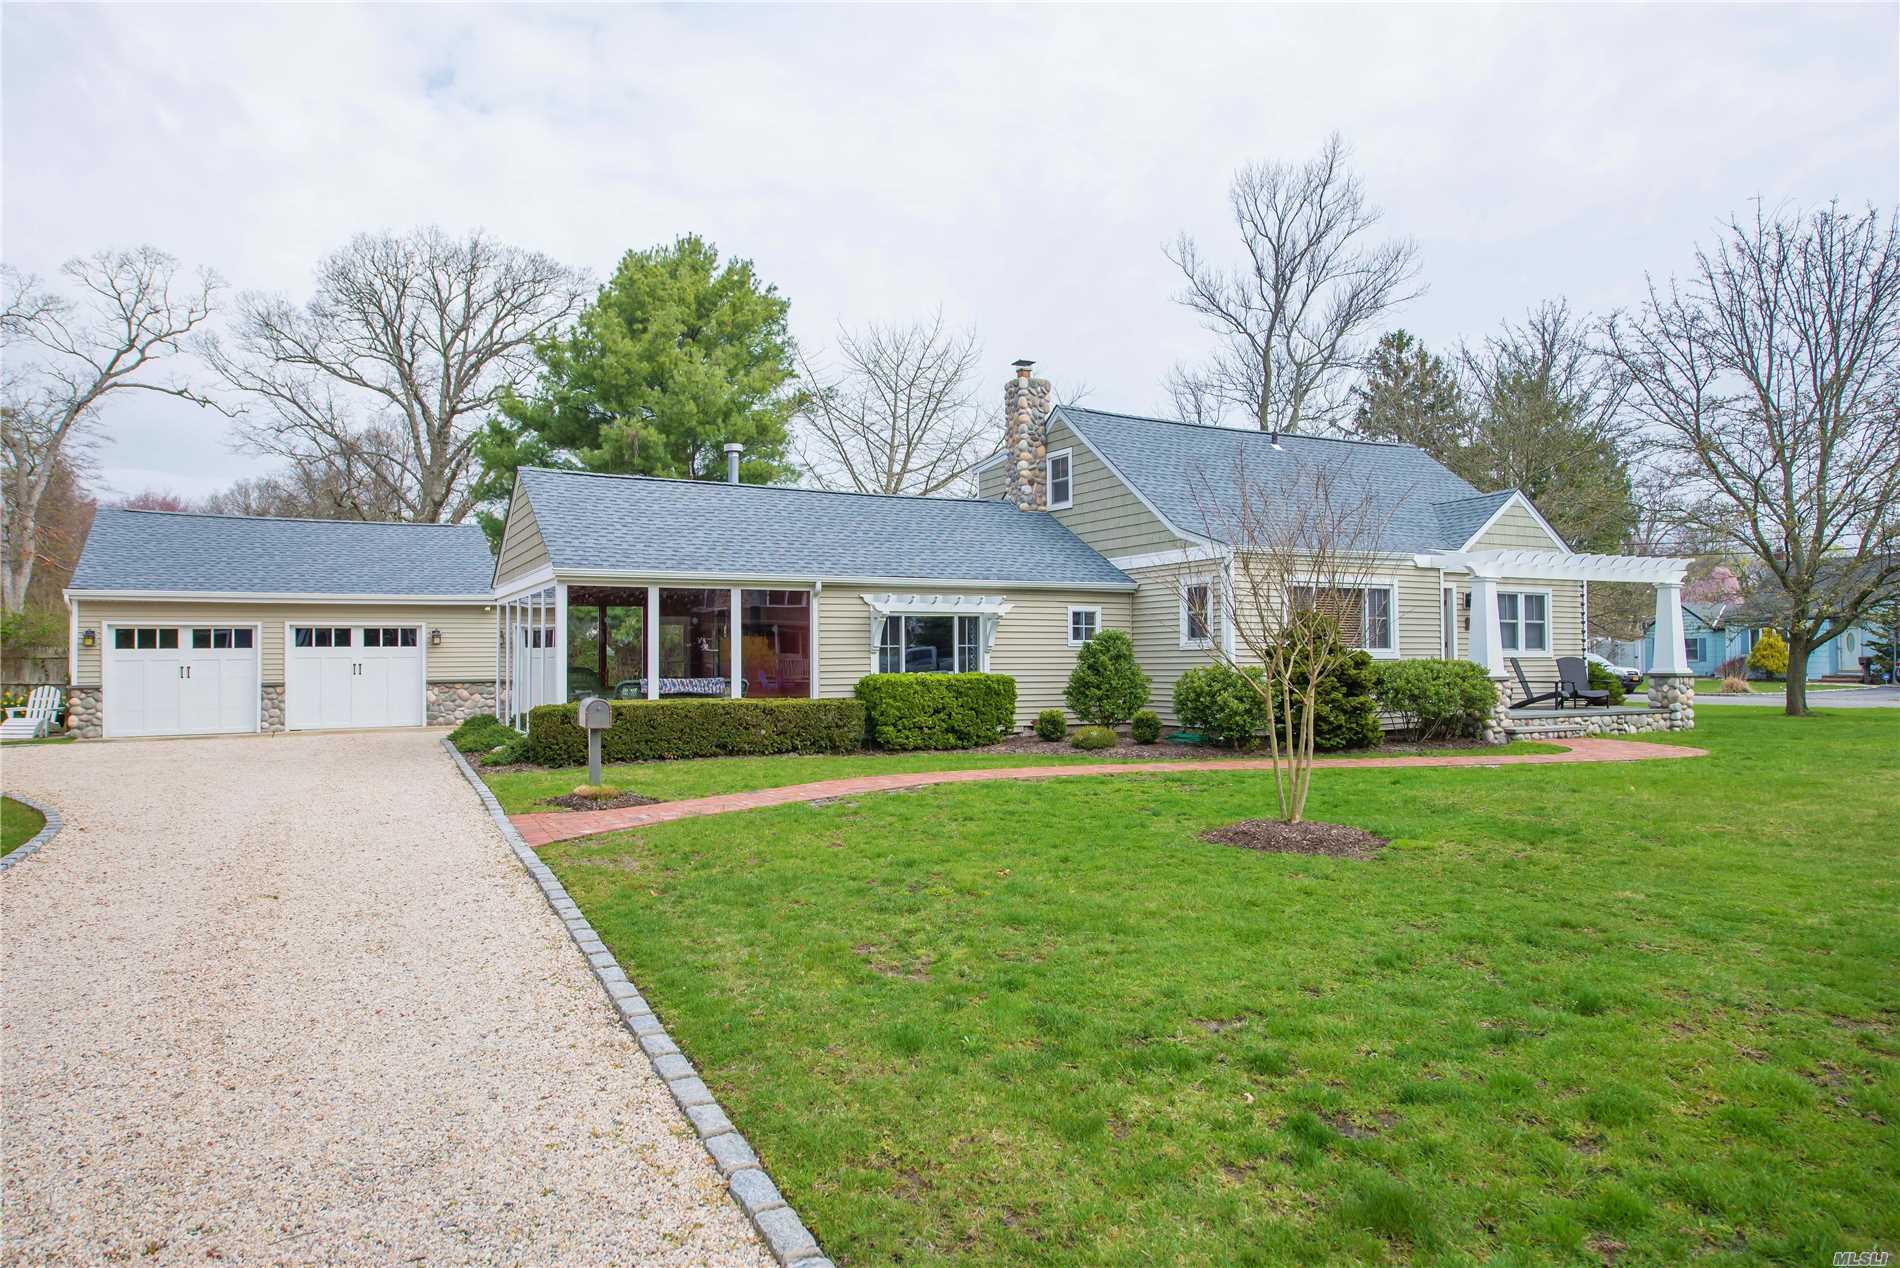 Fantastic Expanded Cape in West Islip&rsquo;s Pine Lake Neighborhood! A thoroughly updated 4 bedroom 2 bathroom home with a 2 car detached garage. Very private half acre of property on a cul de sac. Beautiful architectural details, and a show stopping indoor outdoor living space with removable windows and screens. Move right in!